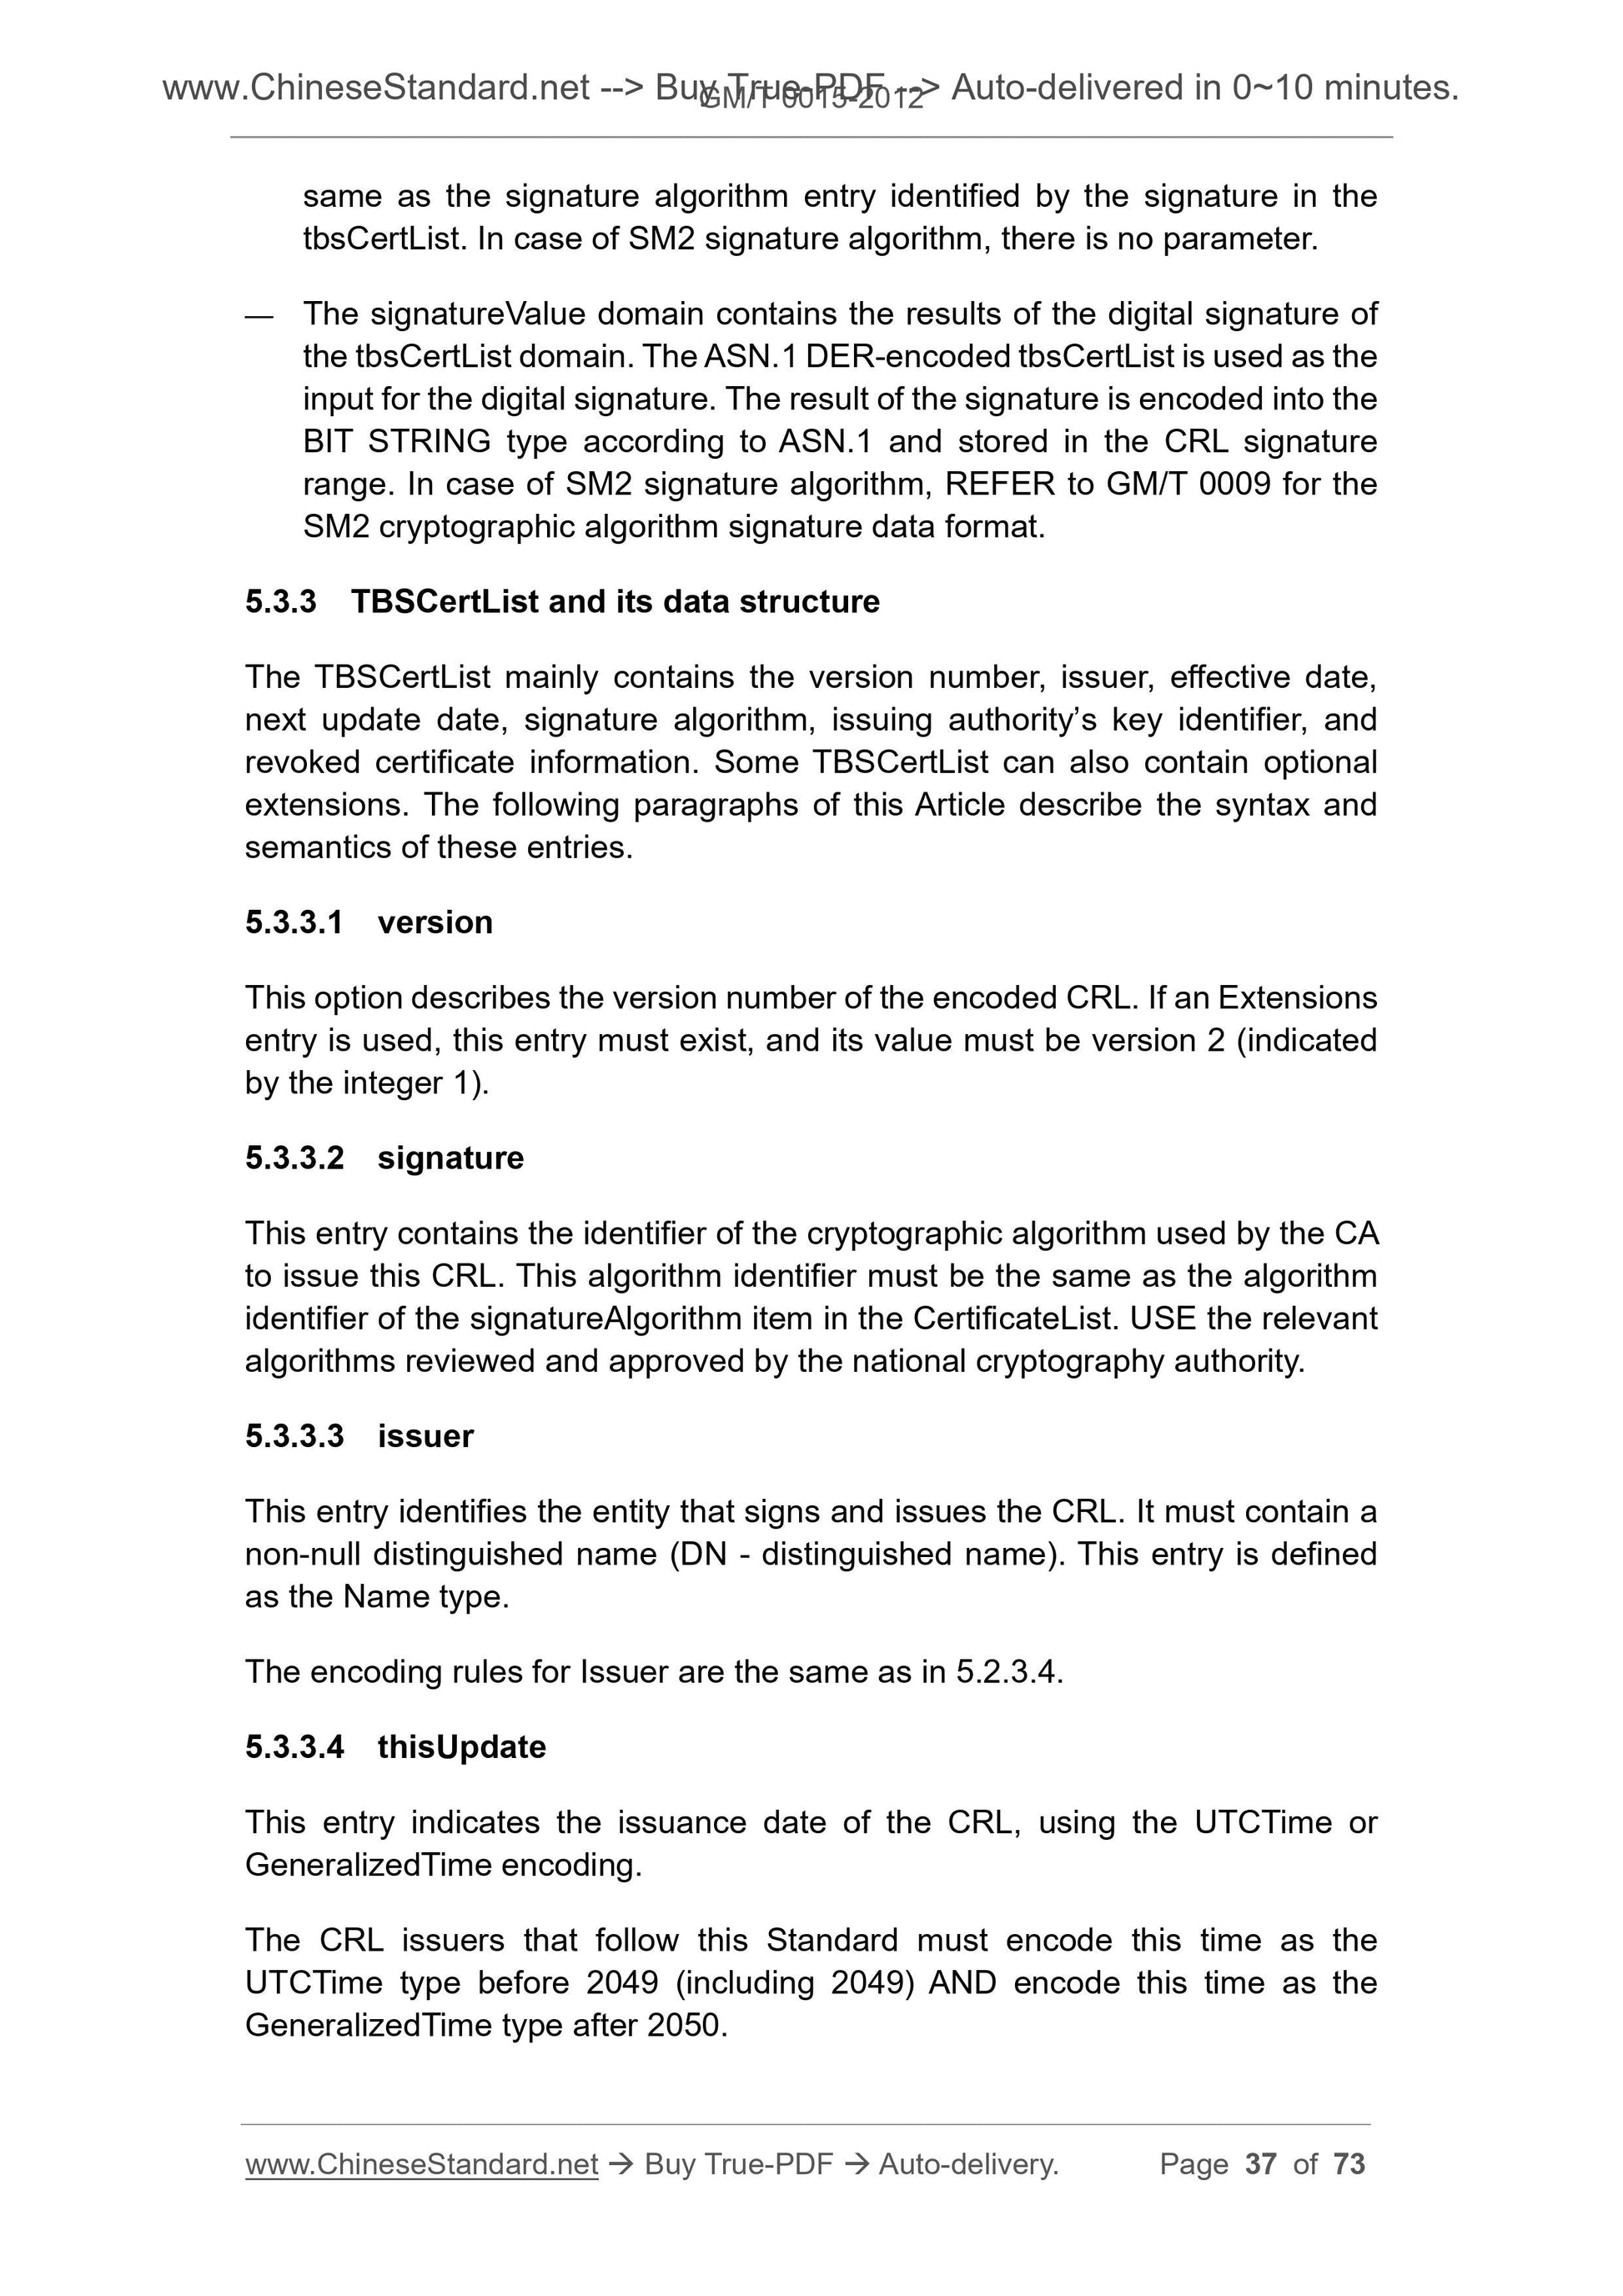 GM/T 0015-2012 Page 11